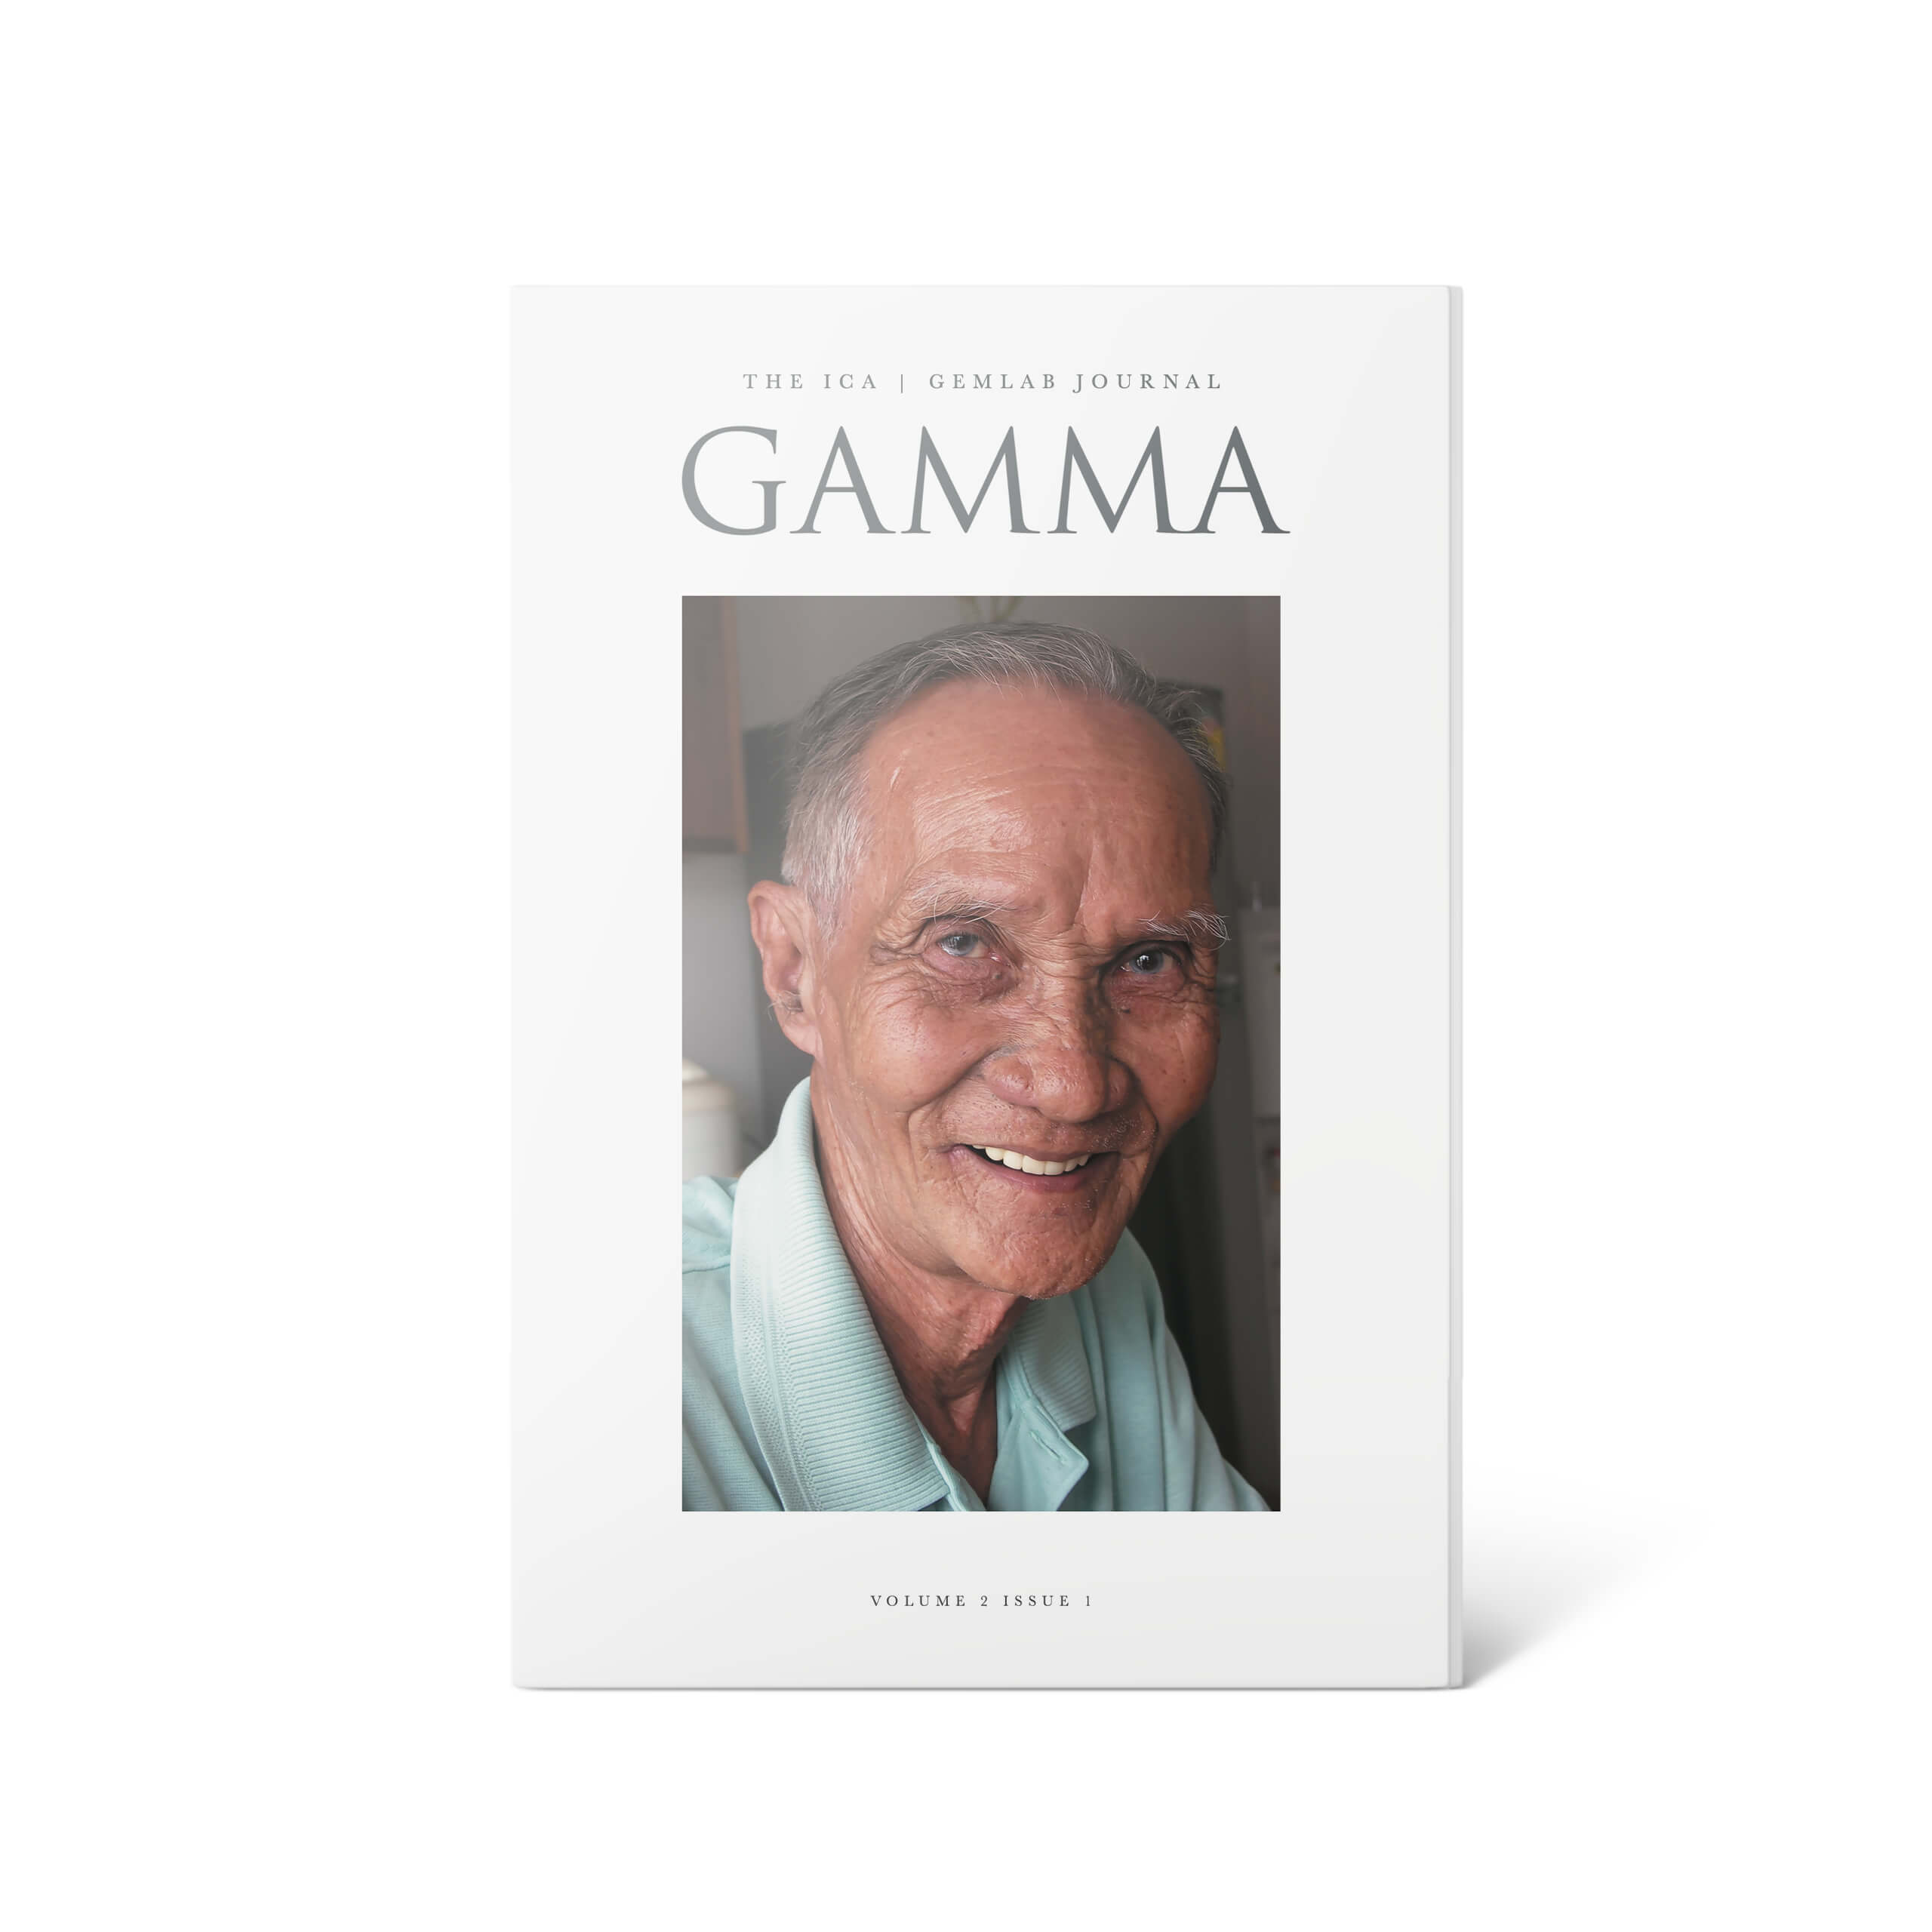 Gamma the ICA GemLab Gemmological journal. Volume 1 issue 1. On the ICA Gemlab journal cover, Mr. Sammuang Kaewen who was regarded as the father of corundum heating in Thailand.